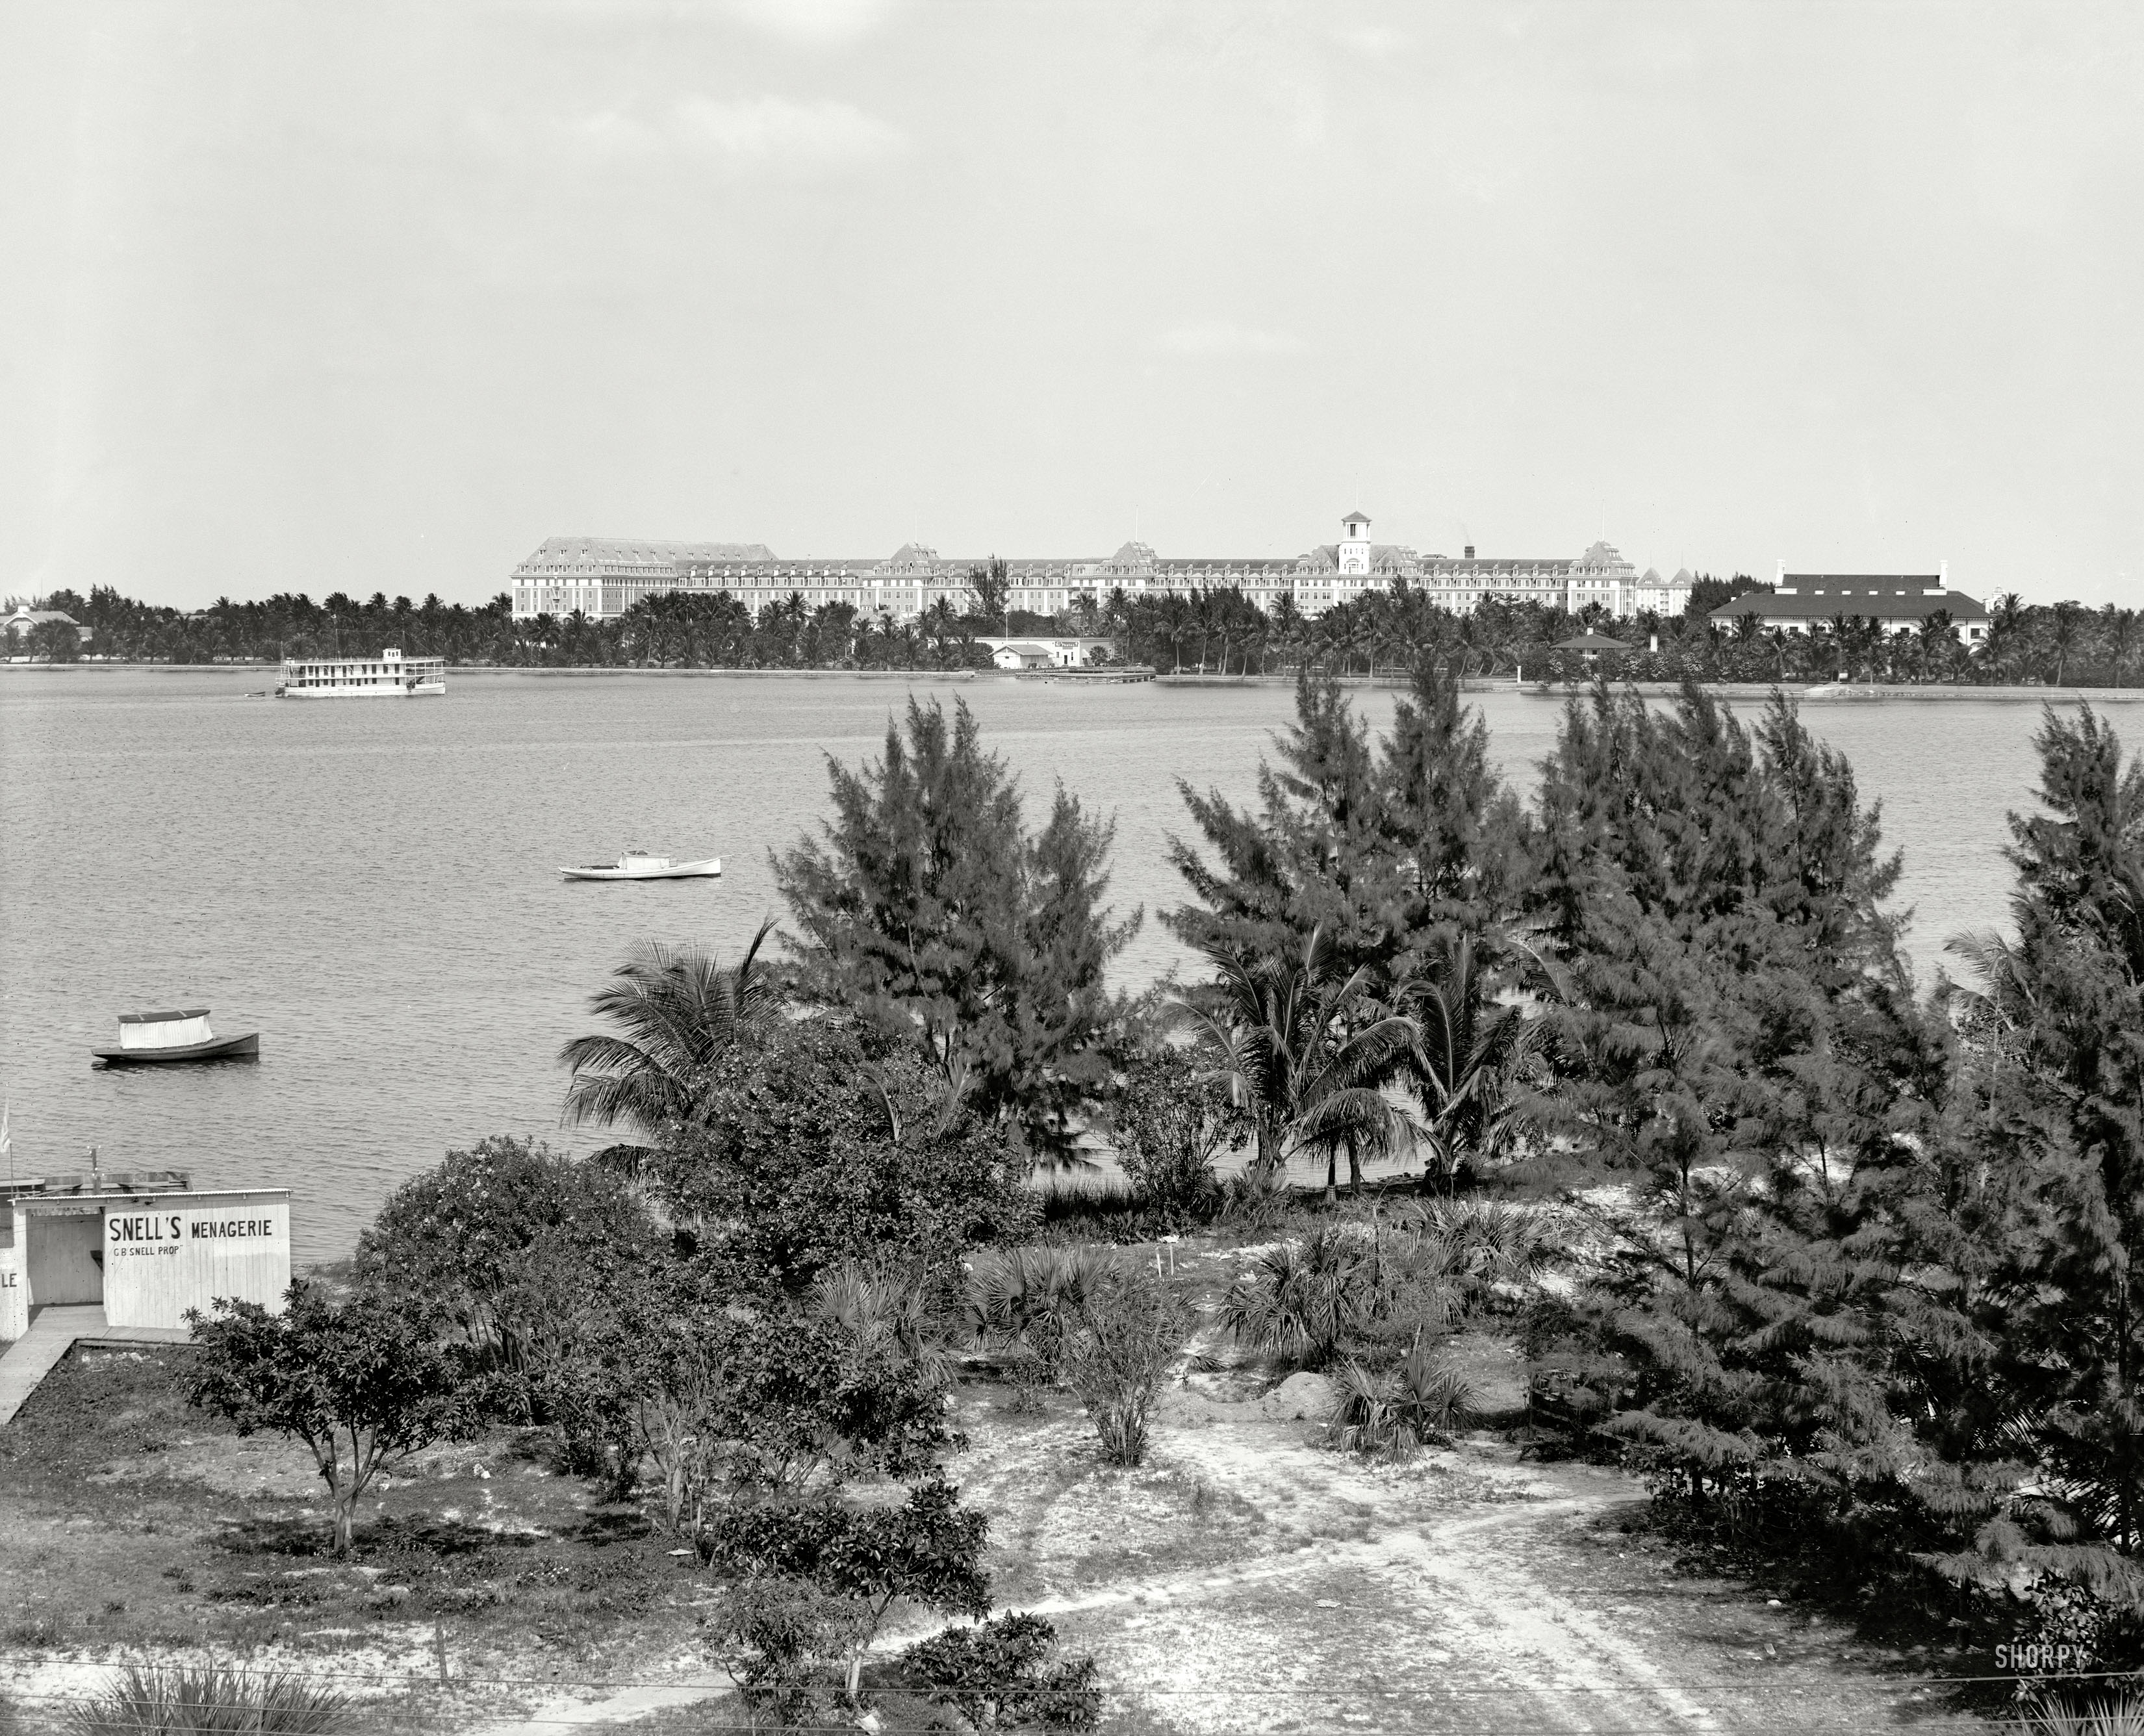 Palm Beach, Florida, circa 1910. "Lake Worth and the Royal Poinciana." Henry Flagler's giant hotel, named after the flamboyant flowering tree, holds a place in the record books as the planet's largest wooden structure. At the other extreme: Snell's Menagerie. 8x10 glass negative, Detroit Publishing Co. View full size.